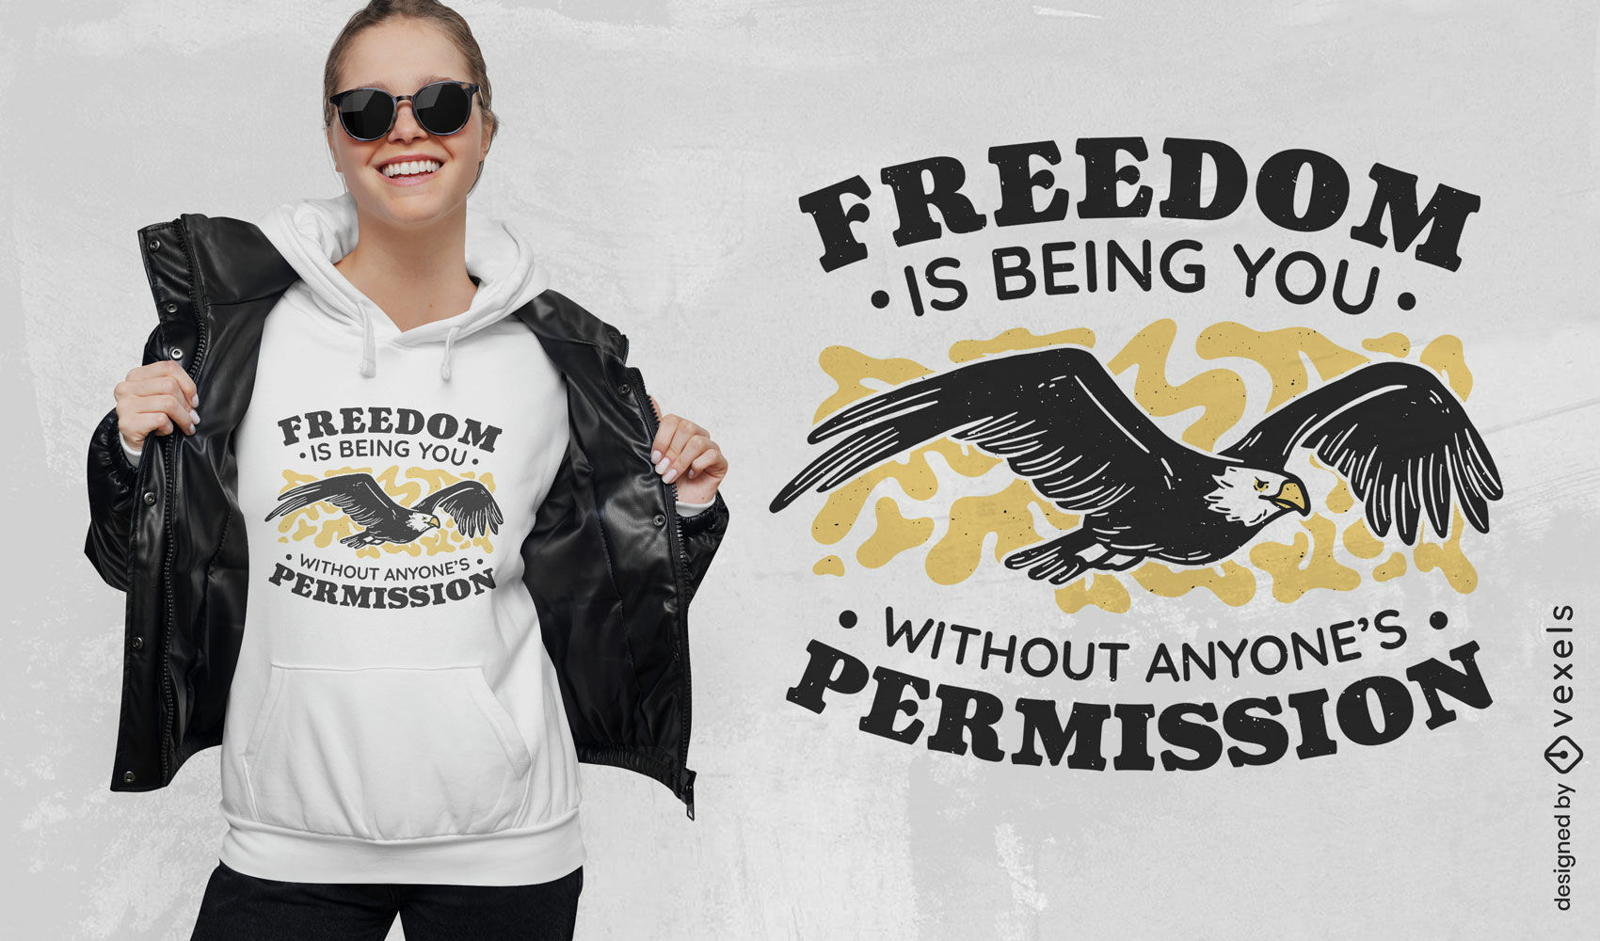 Eagle flying to freedom t-shirt design